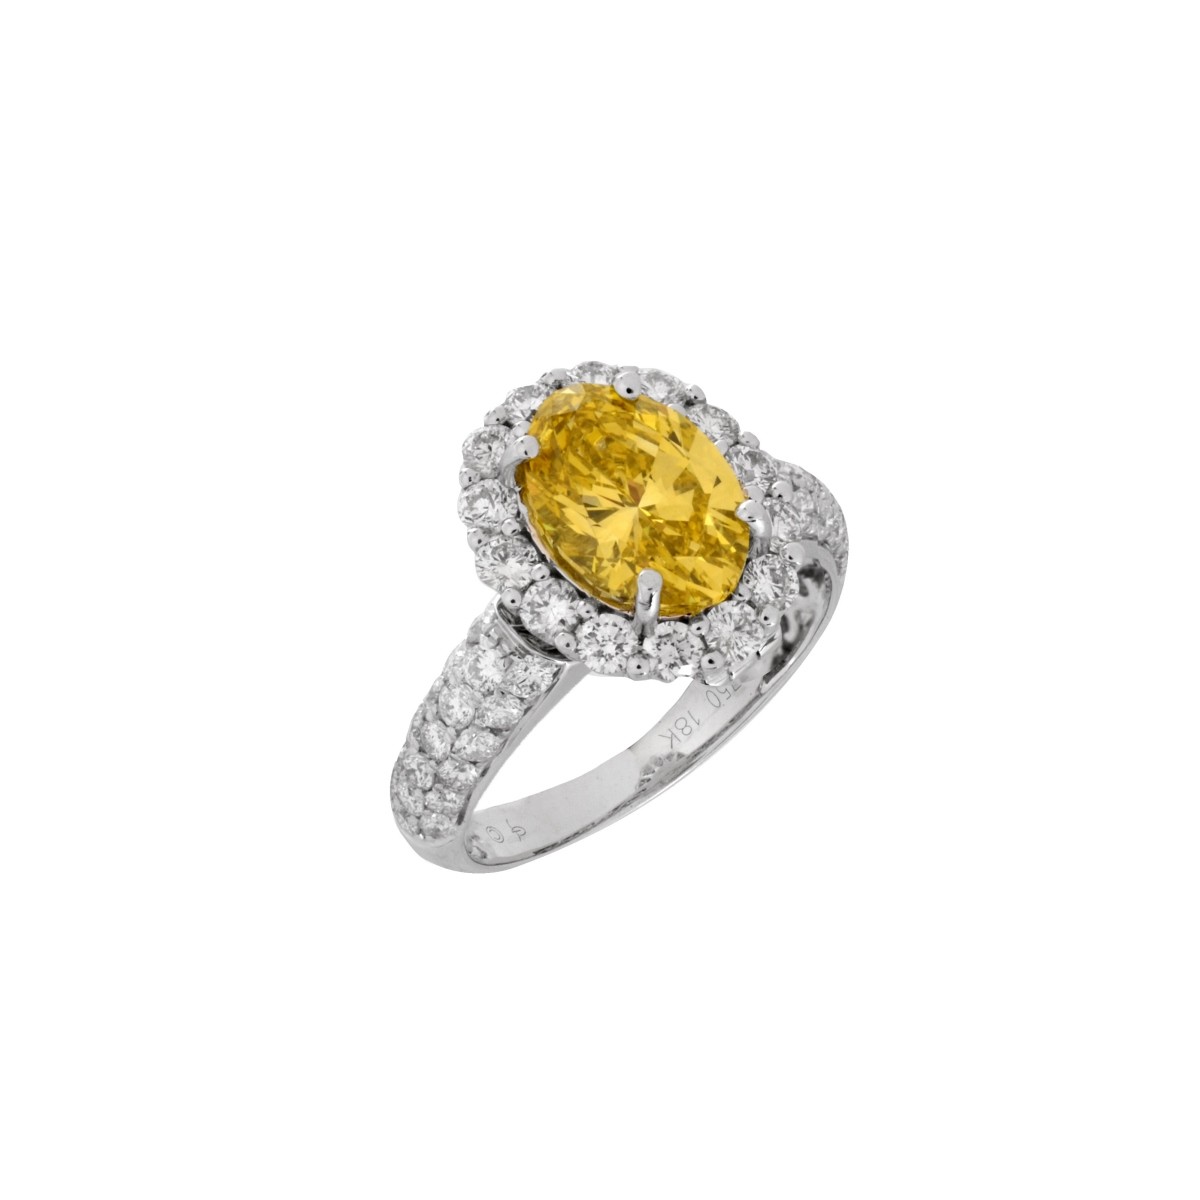 Canary Yellow Diamond and 18K Ring